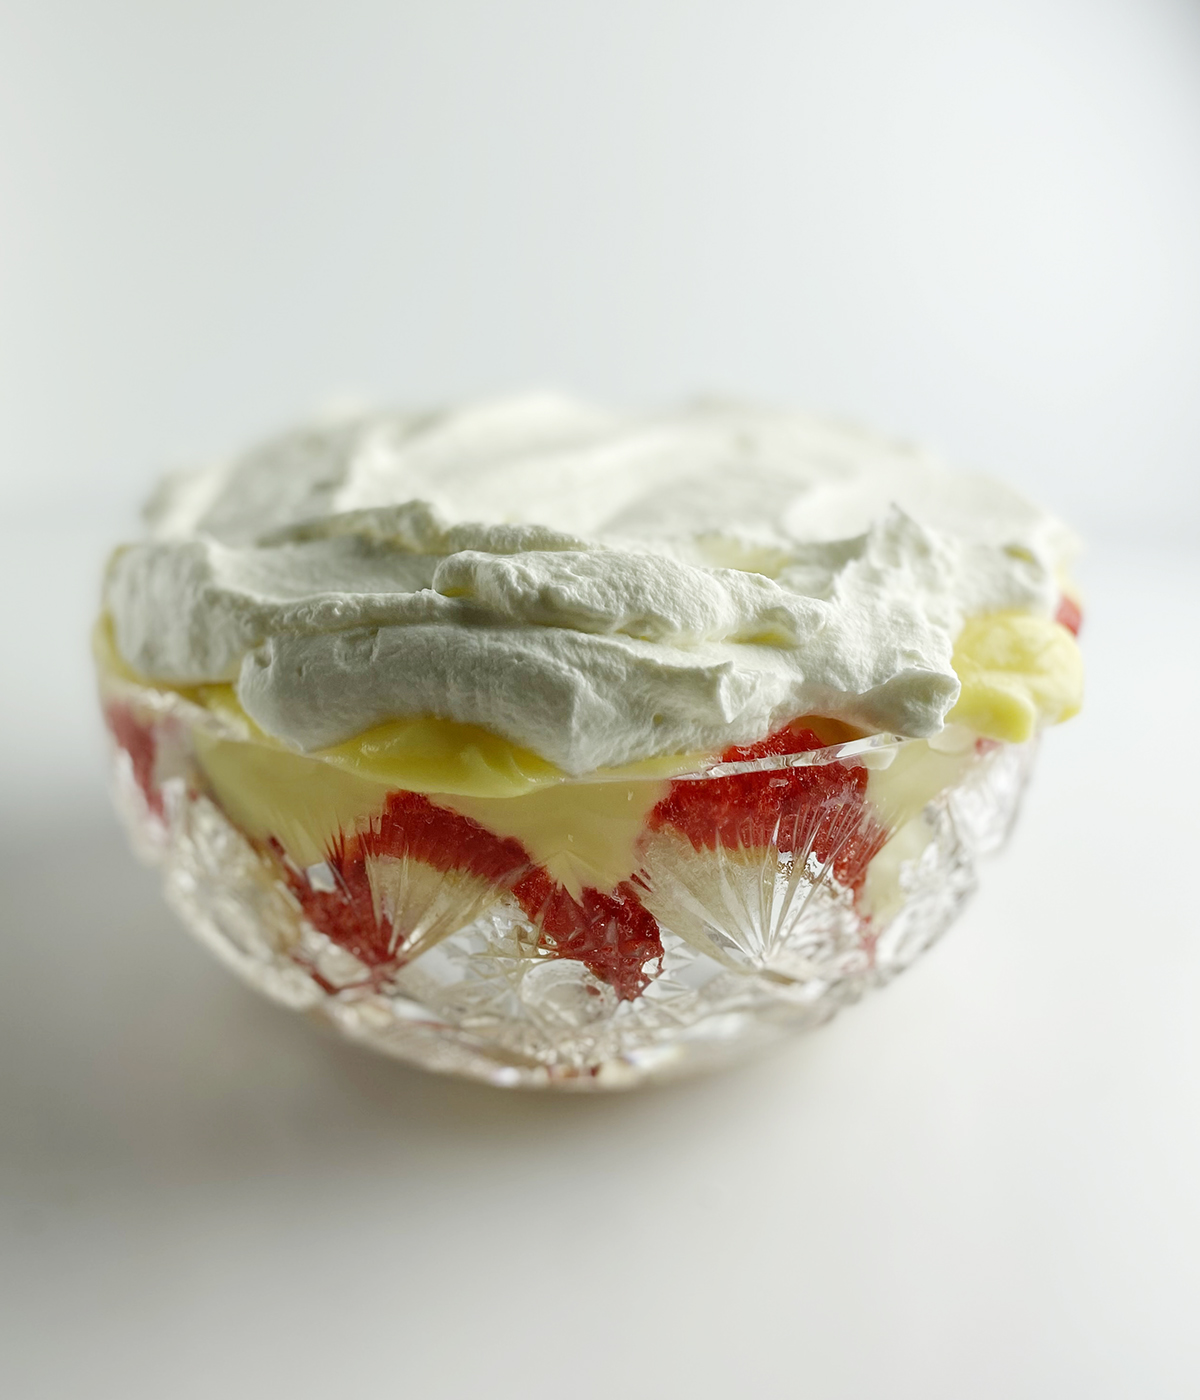 Irish trifle with whipped cream topping.